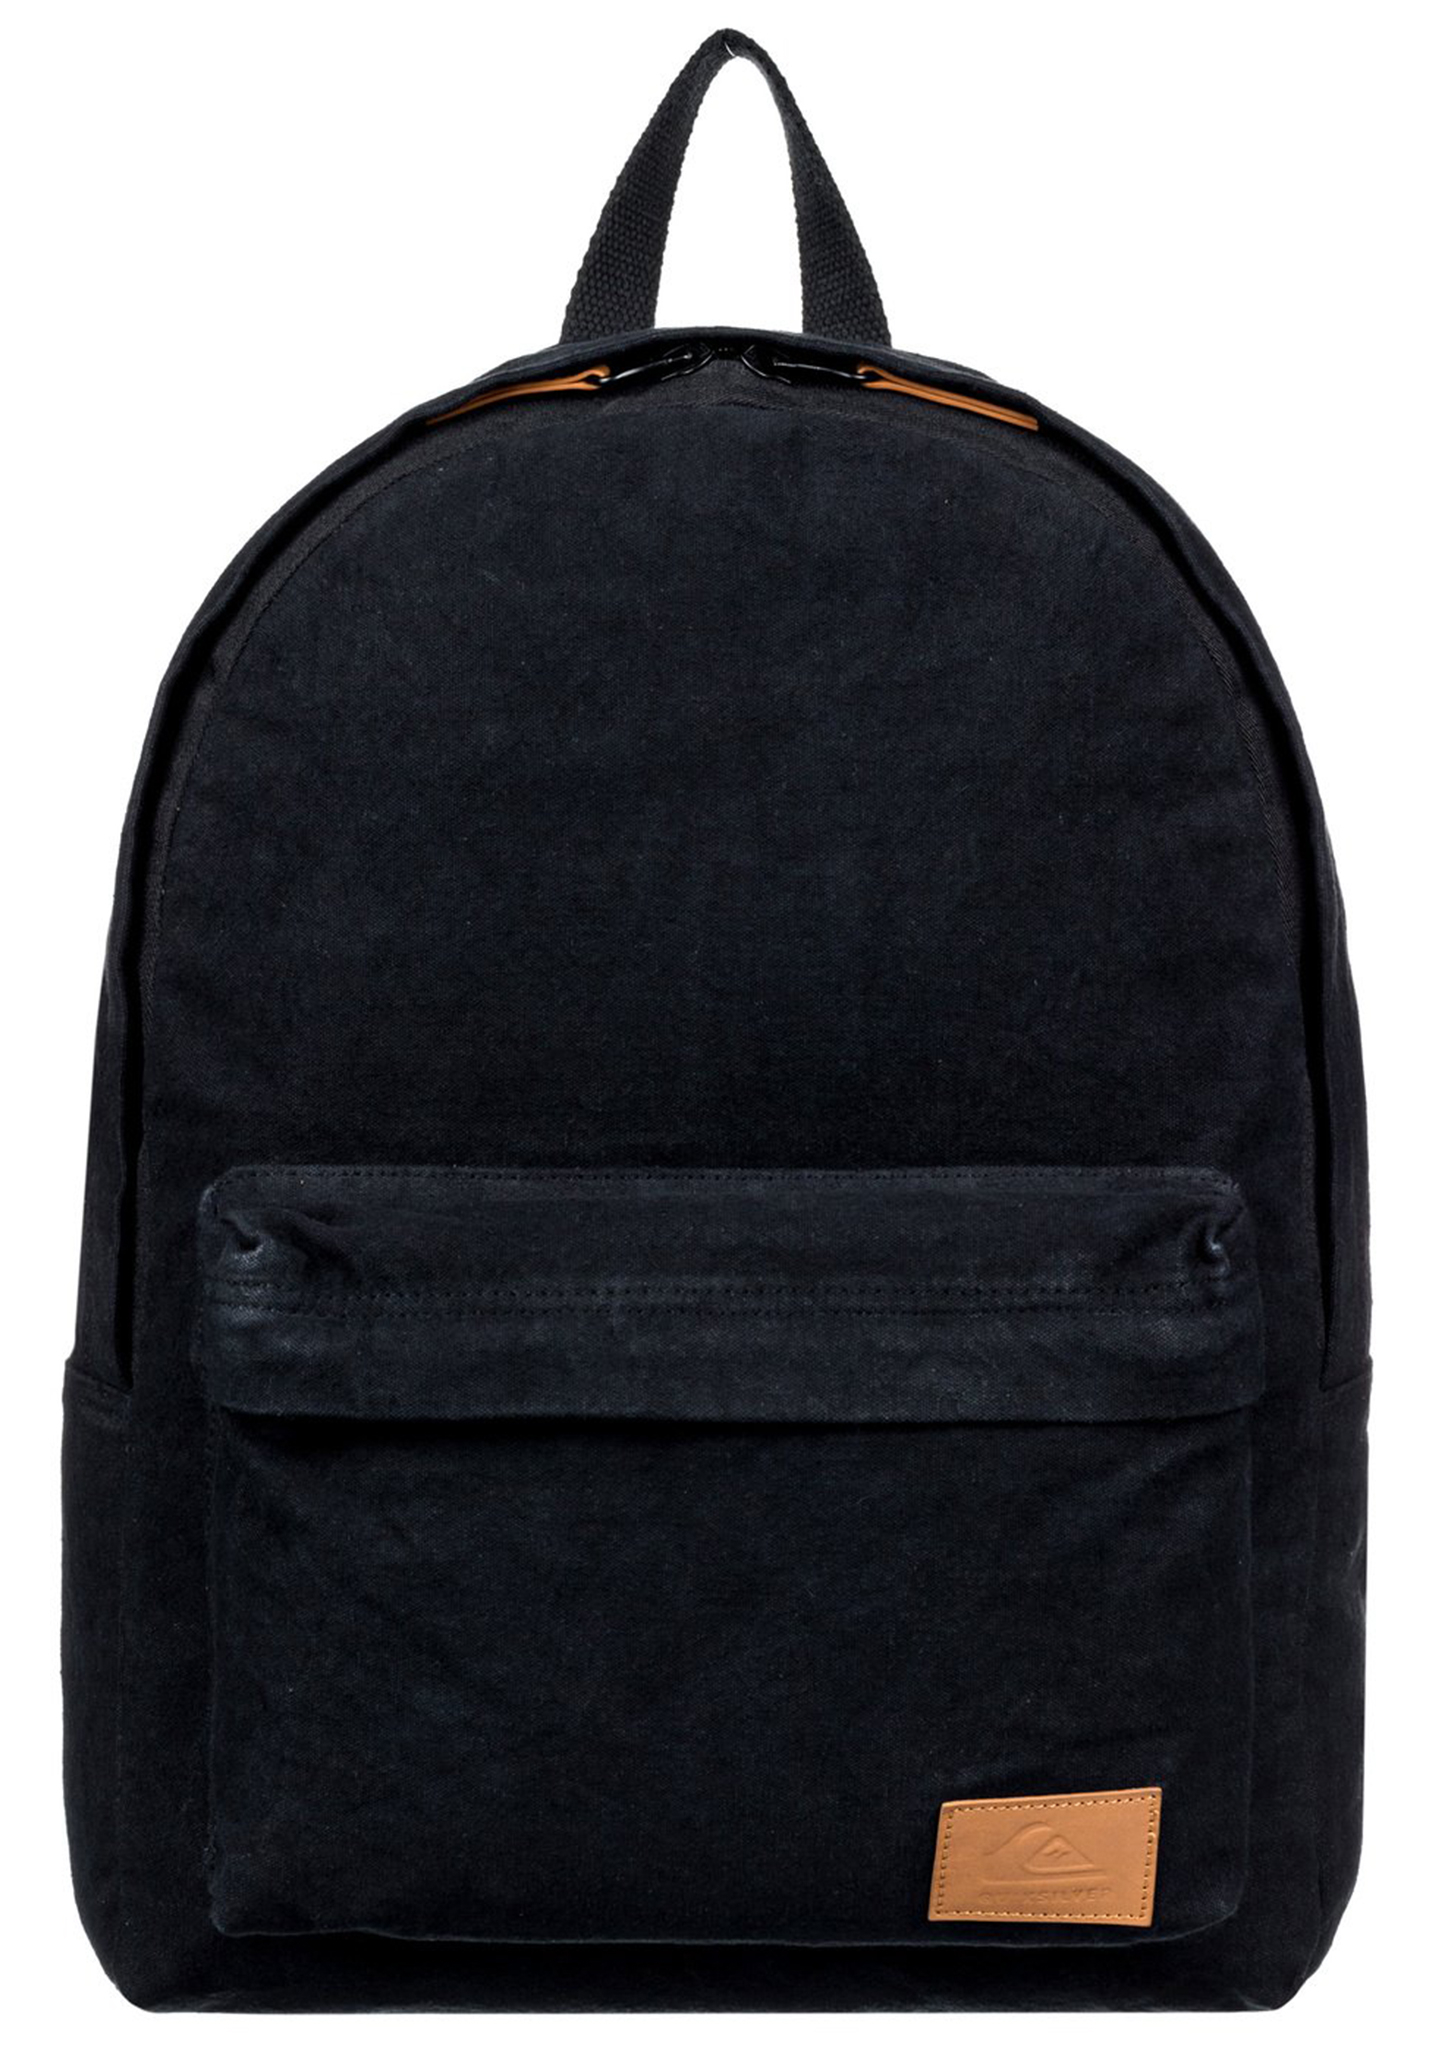 Quiksilver Everyday Poster 25L Rucksack black One Size